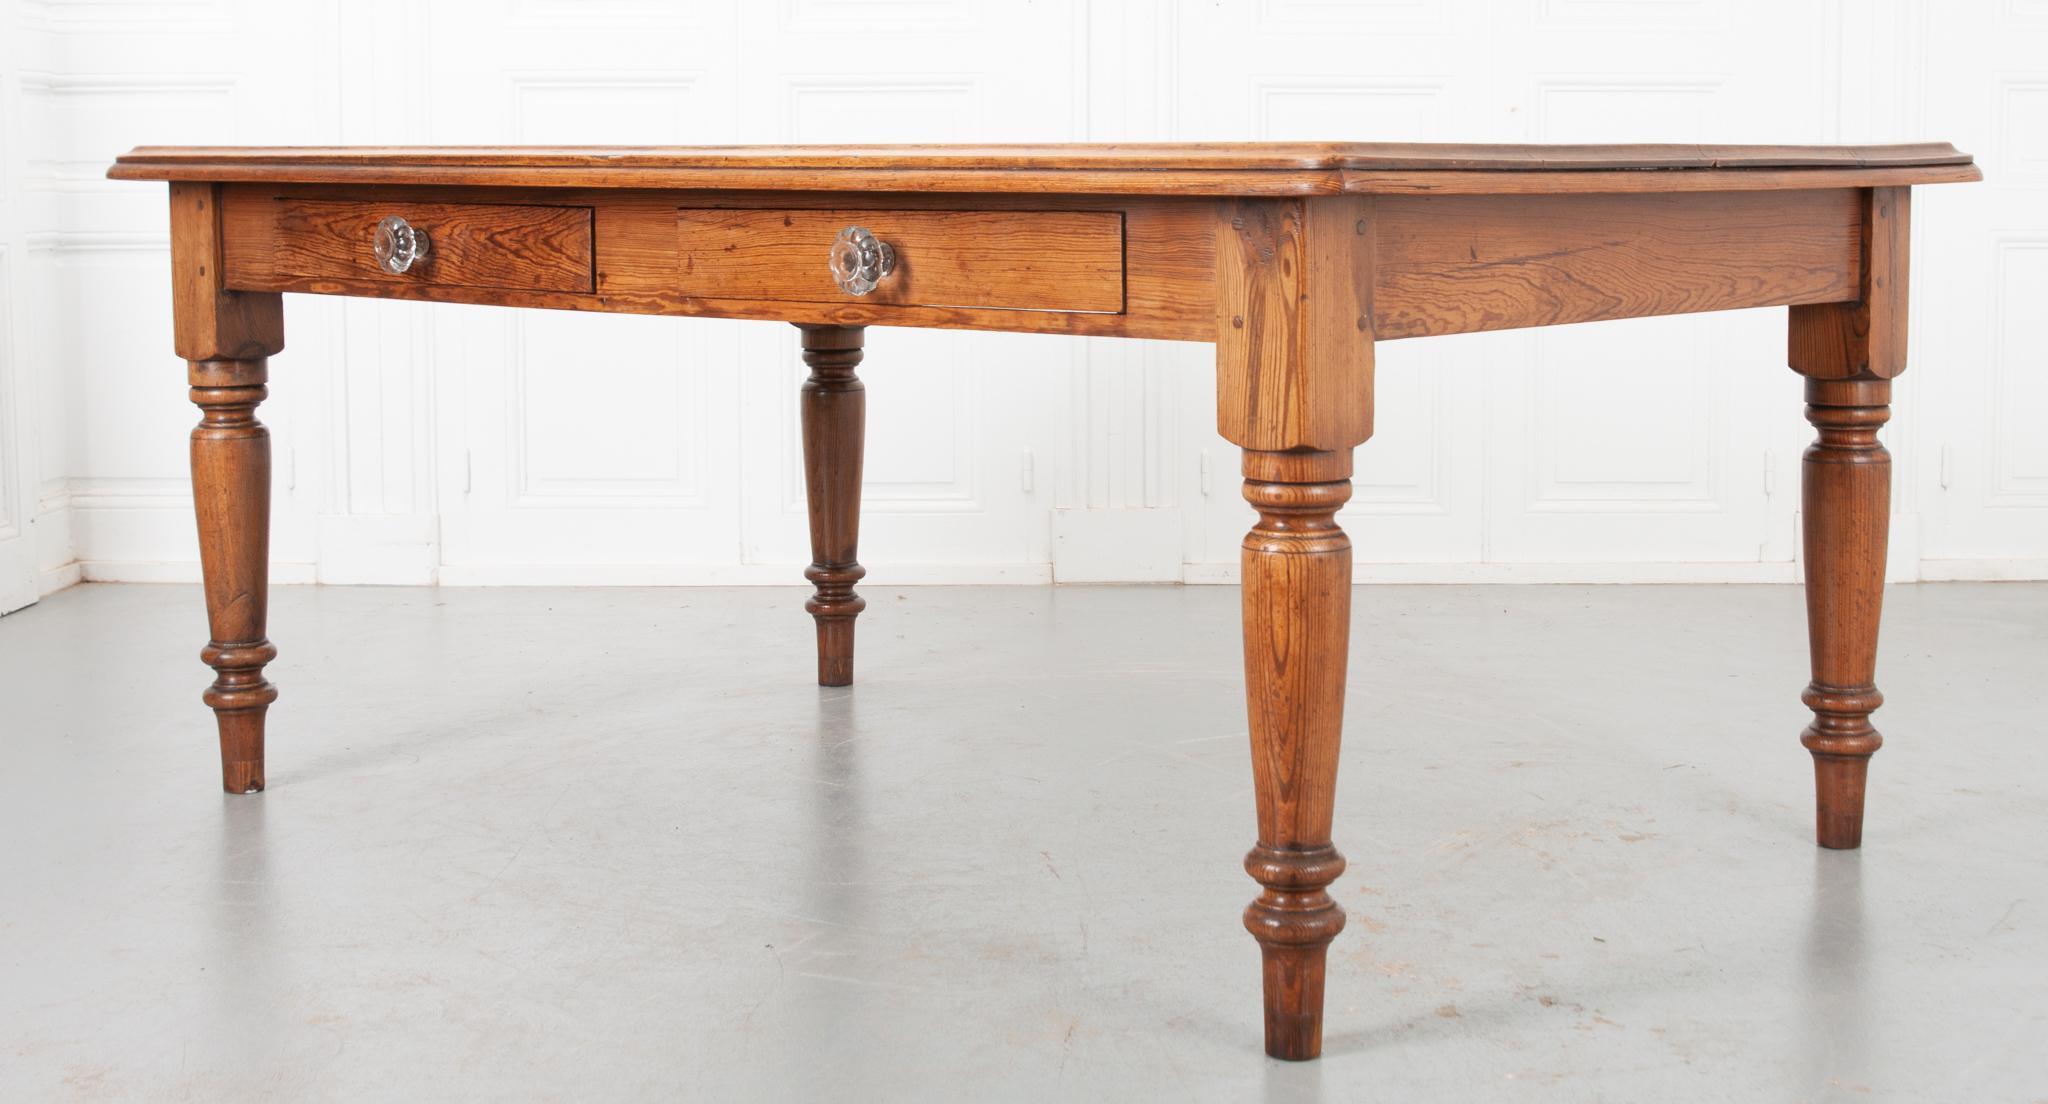 A large, lovely and quintessentially English pine farmhouse table, dating to the 19th century and outfitted with two large drawers. Made of solid pine, the wood used to make this farm table has wonderfully expressive grain and a warm tone that will